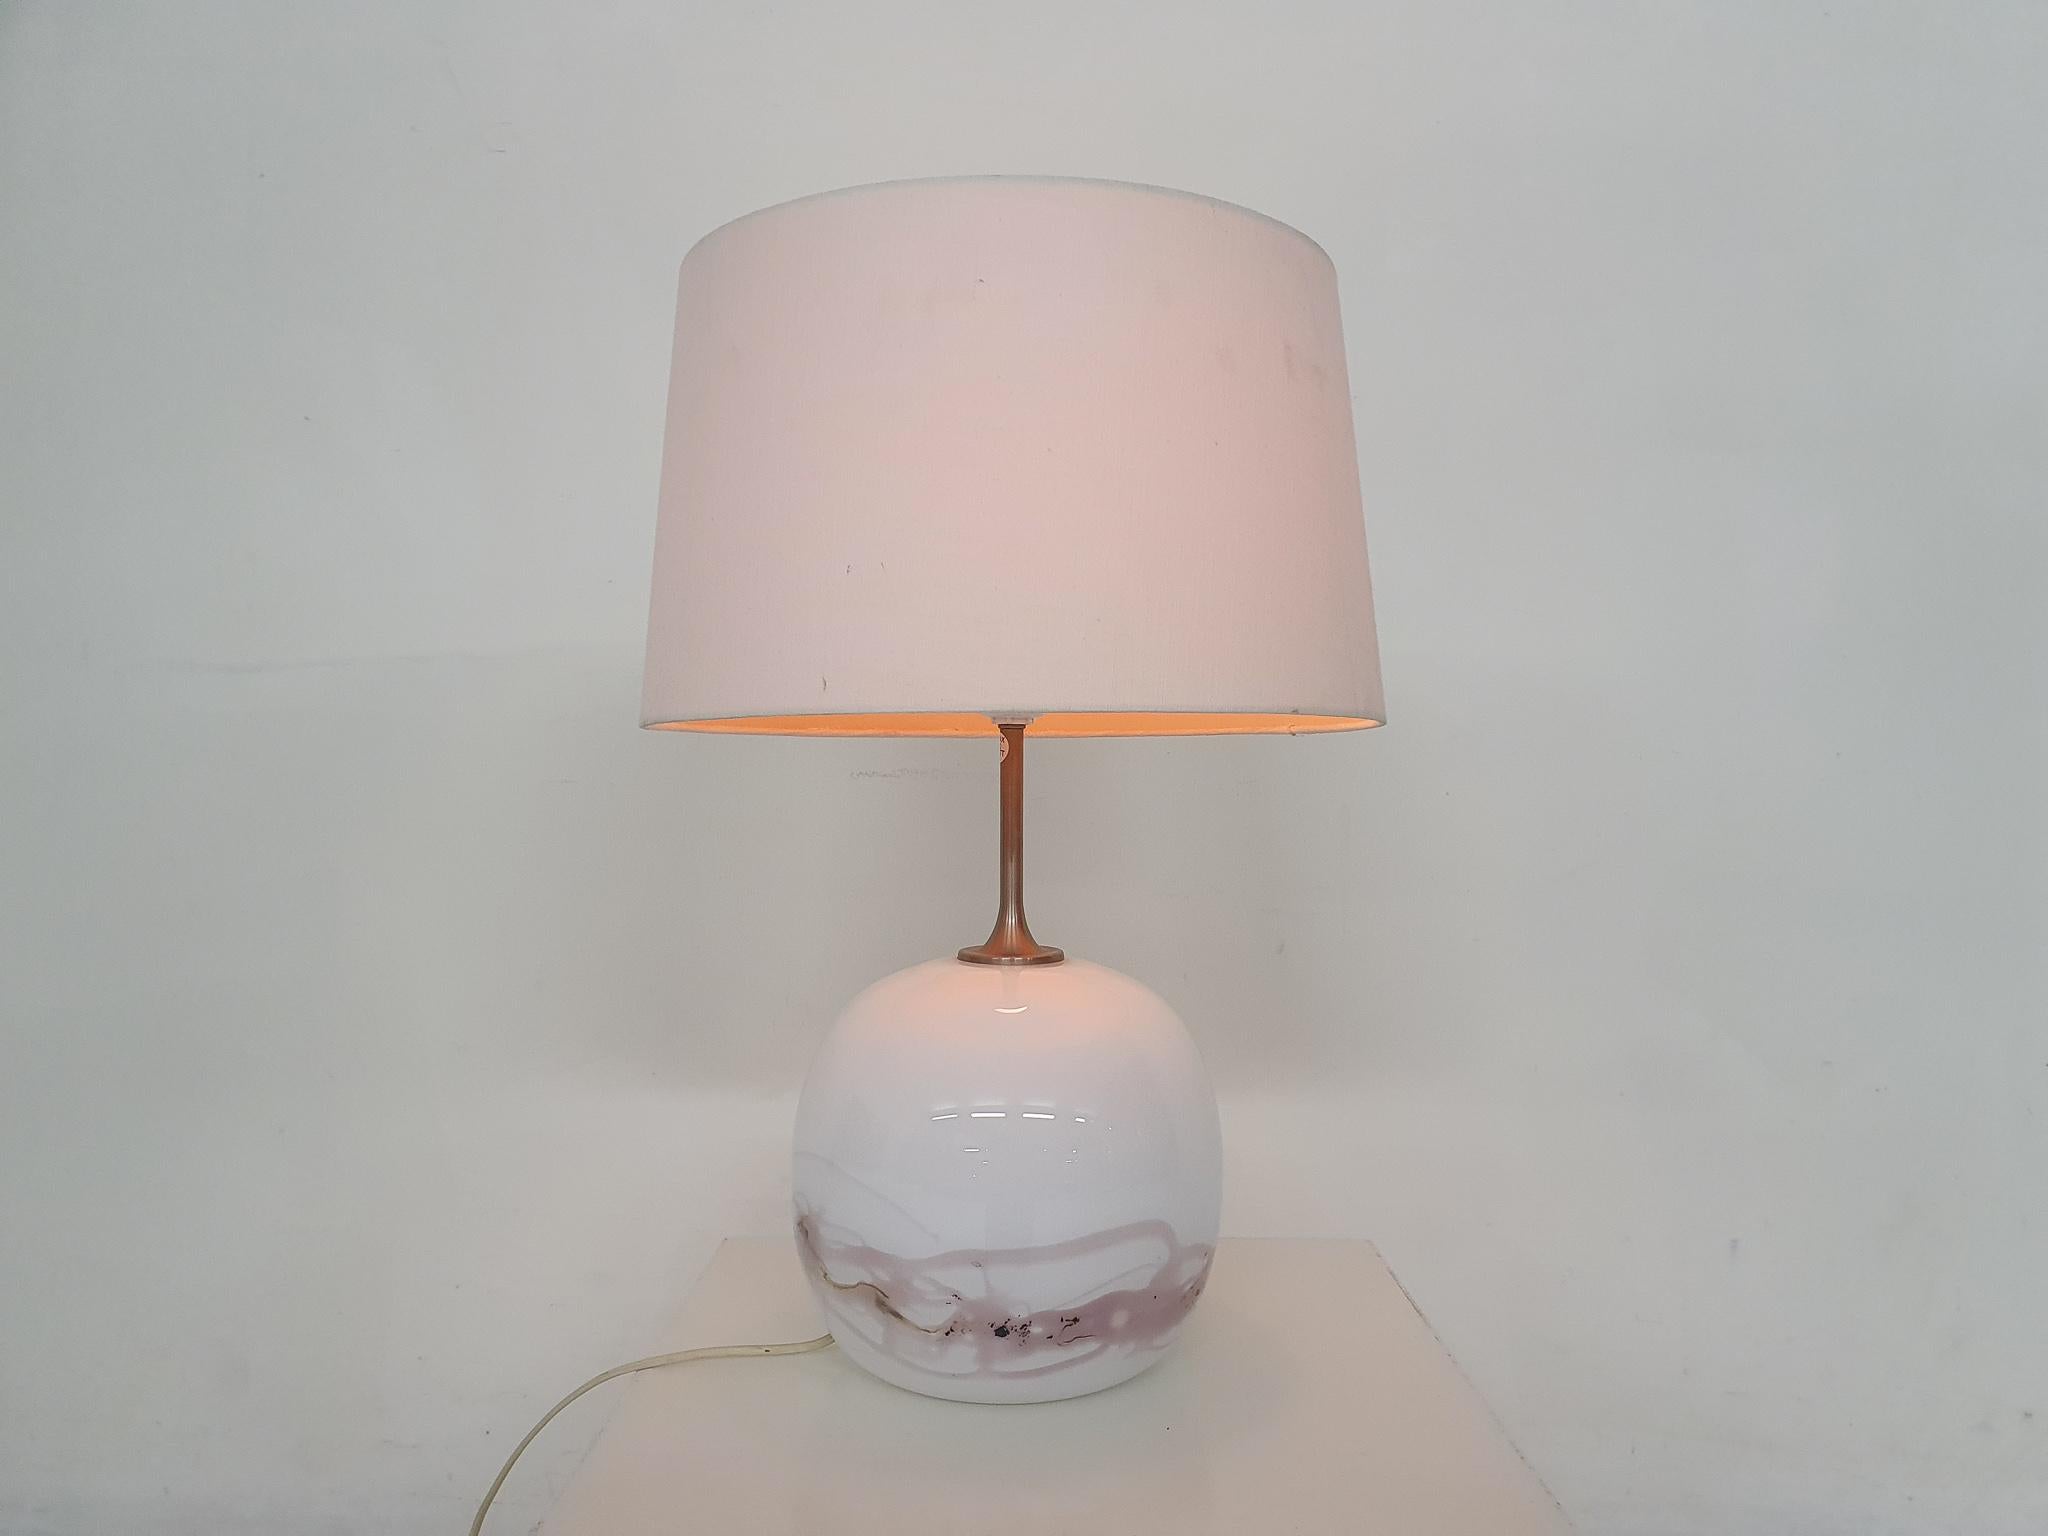 White and pink glass globe by Holmegaard and white (not original) lamp shade. Model Sakura.